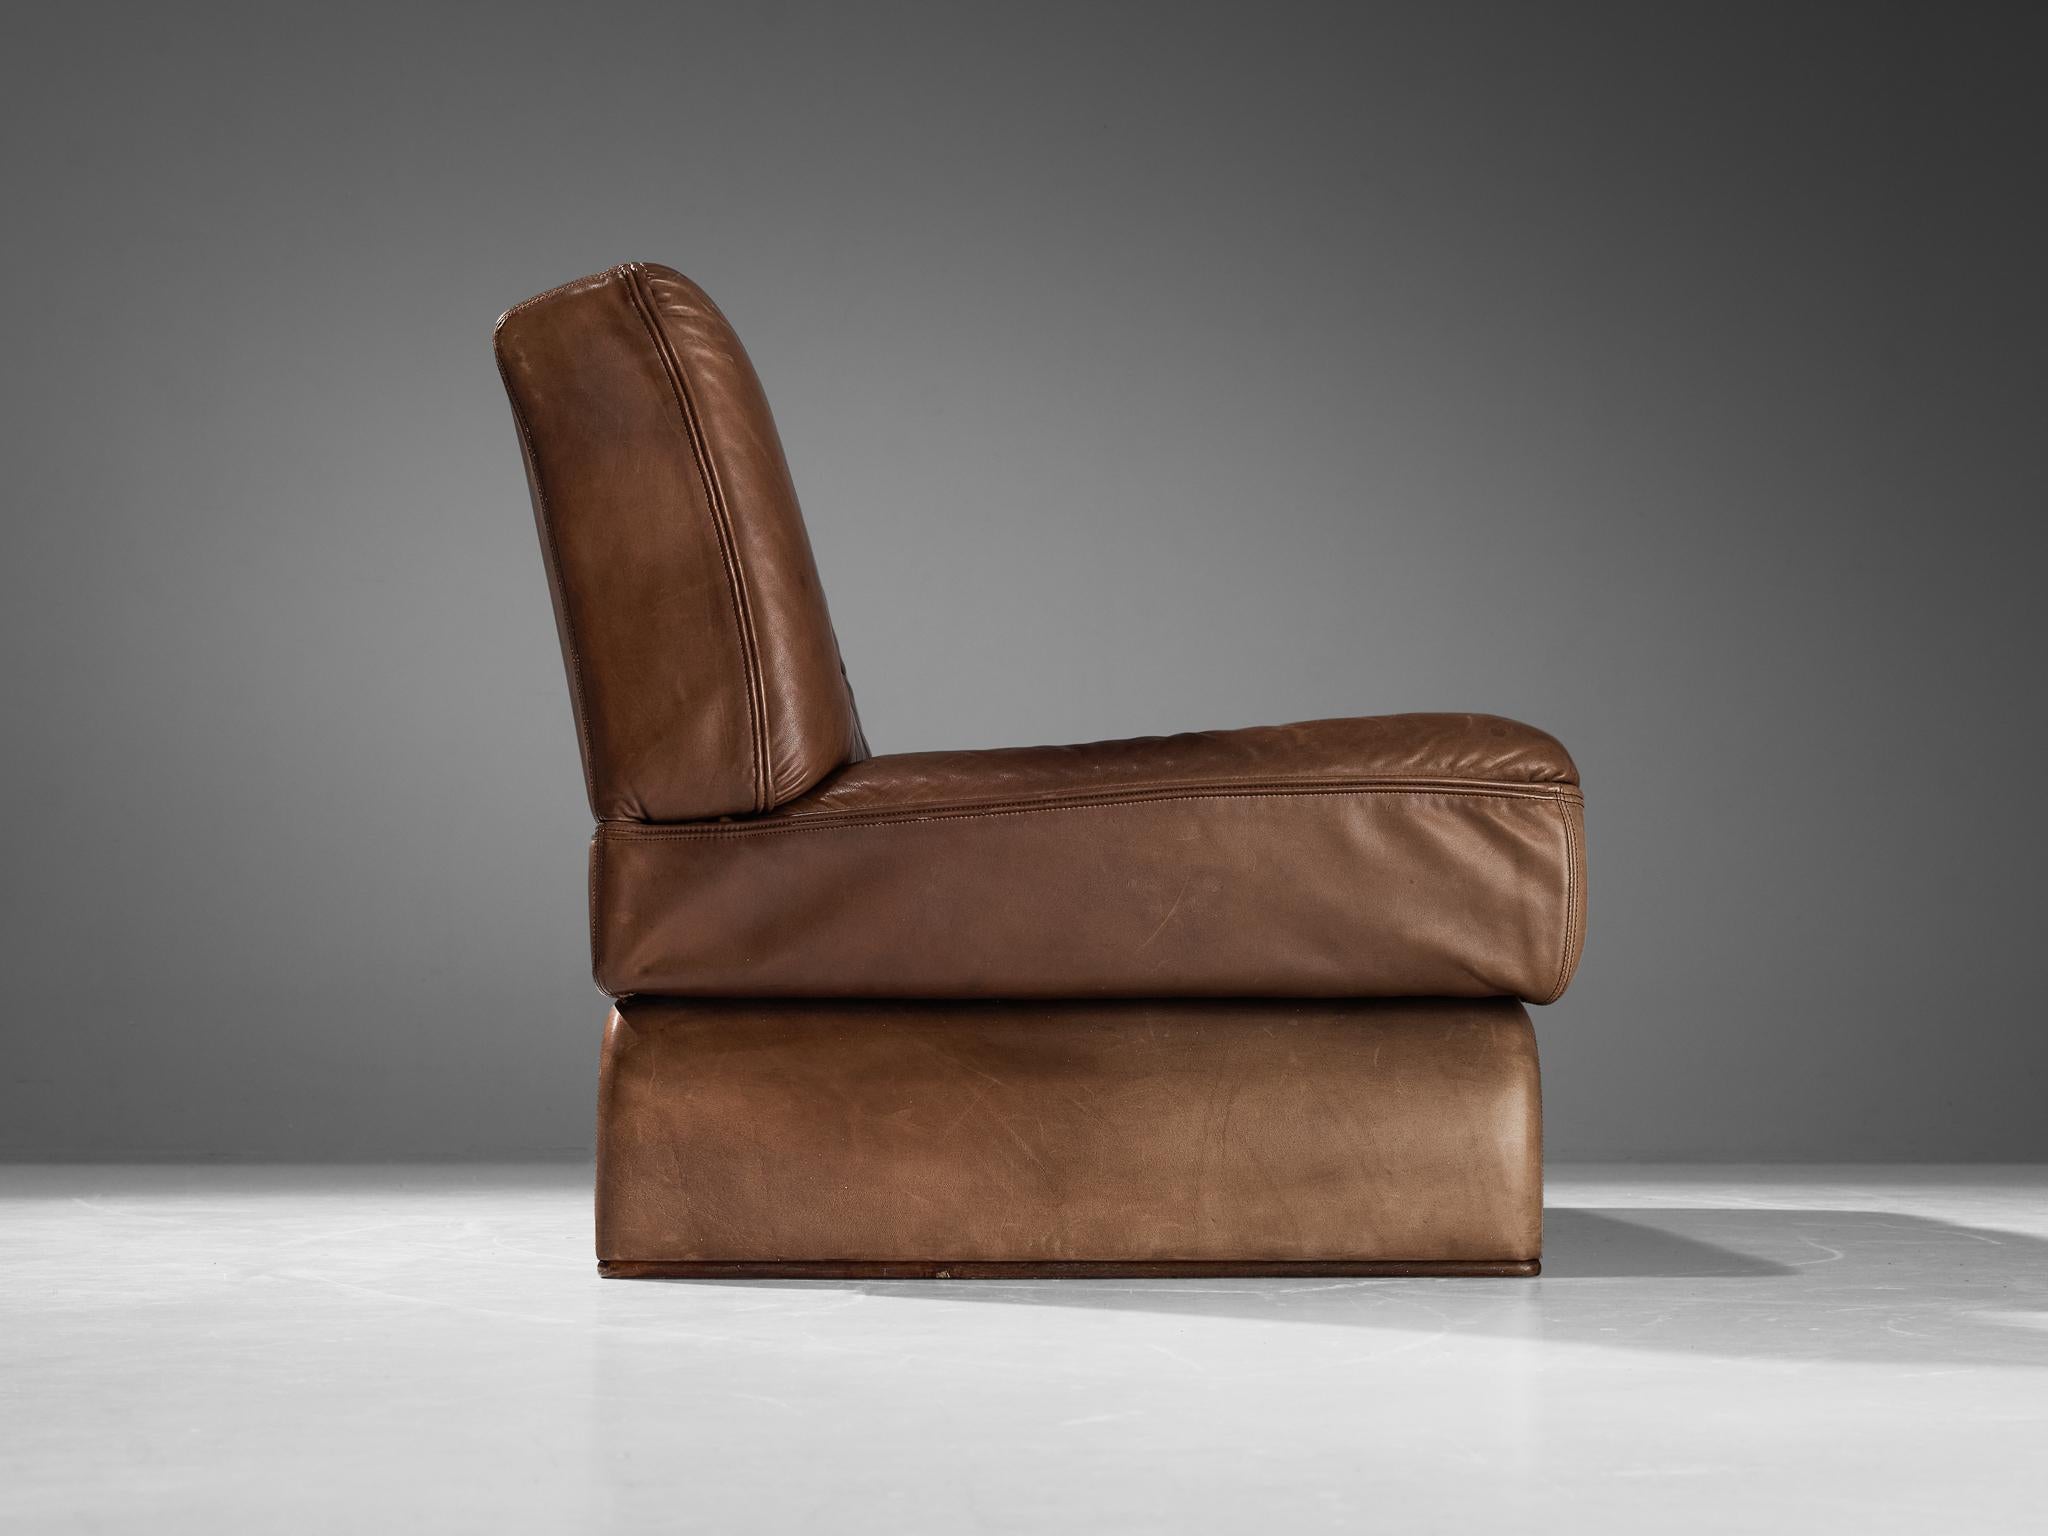 Mid-20th Century Johannes Spalt for Wittmann 'Constanze' Sofa or Daybed in Cognac Leather  For Sale